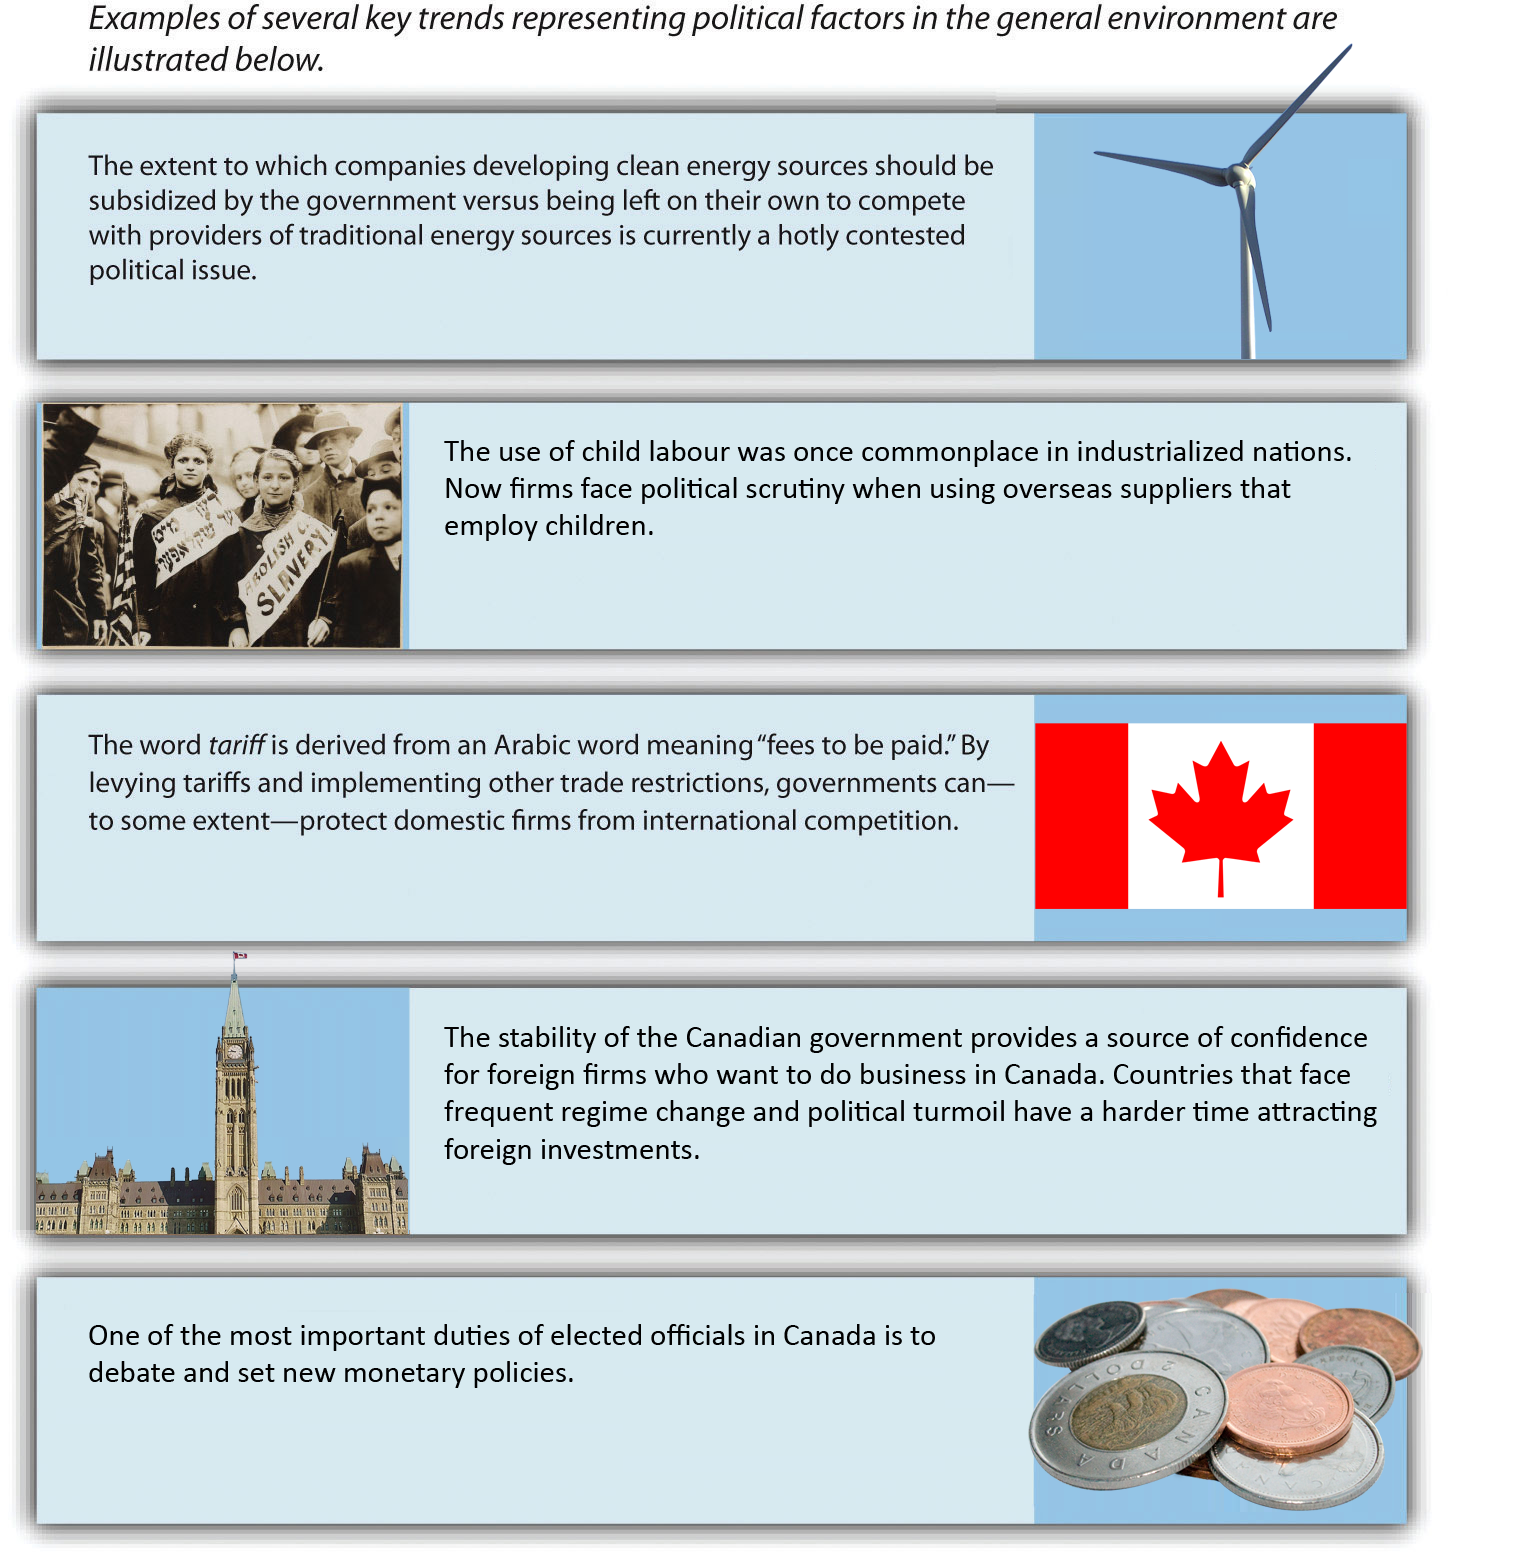 Examples of key trends representing political factors. Image description available